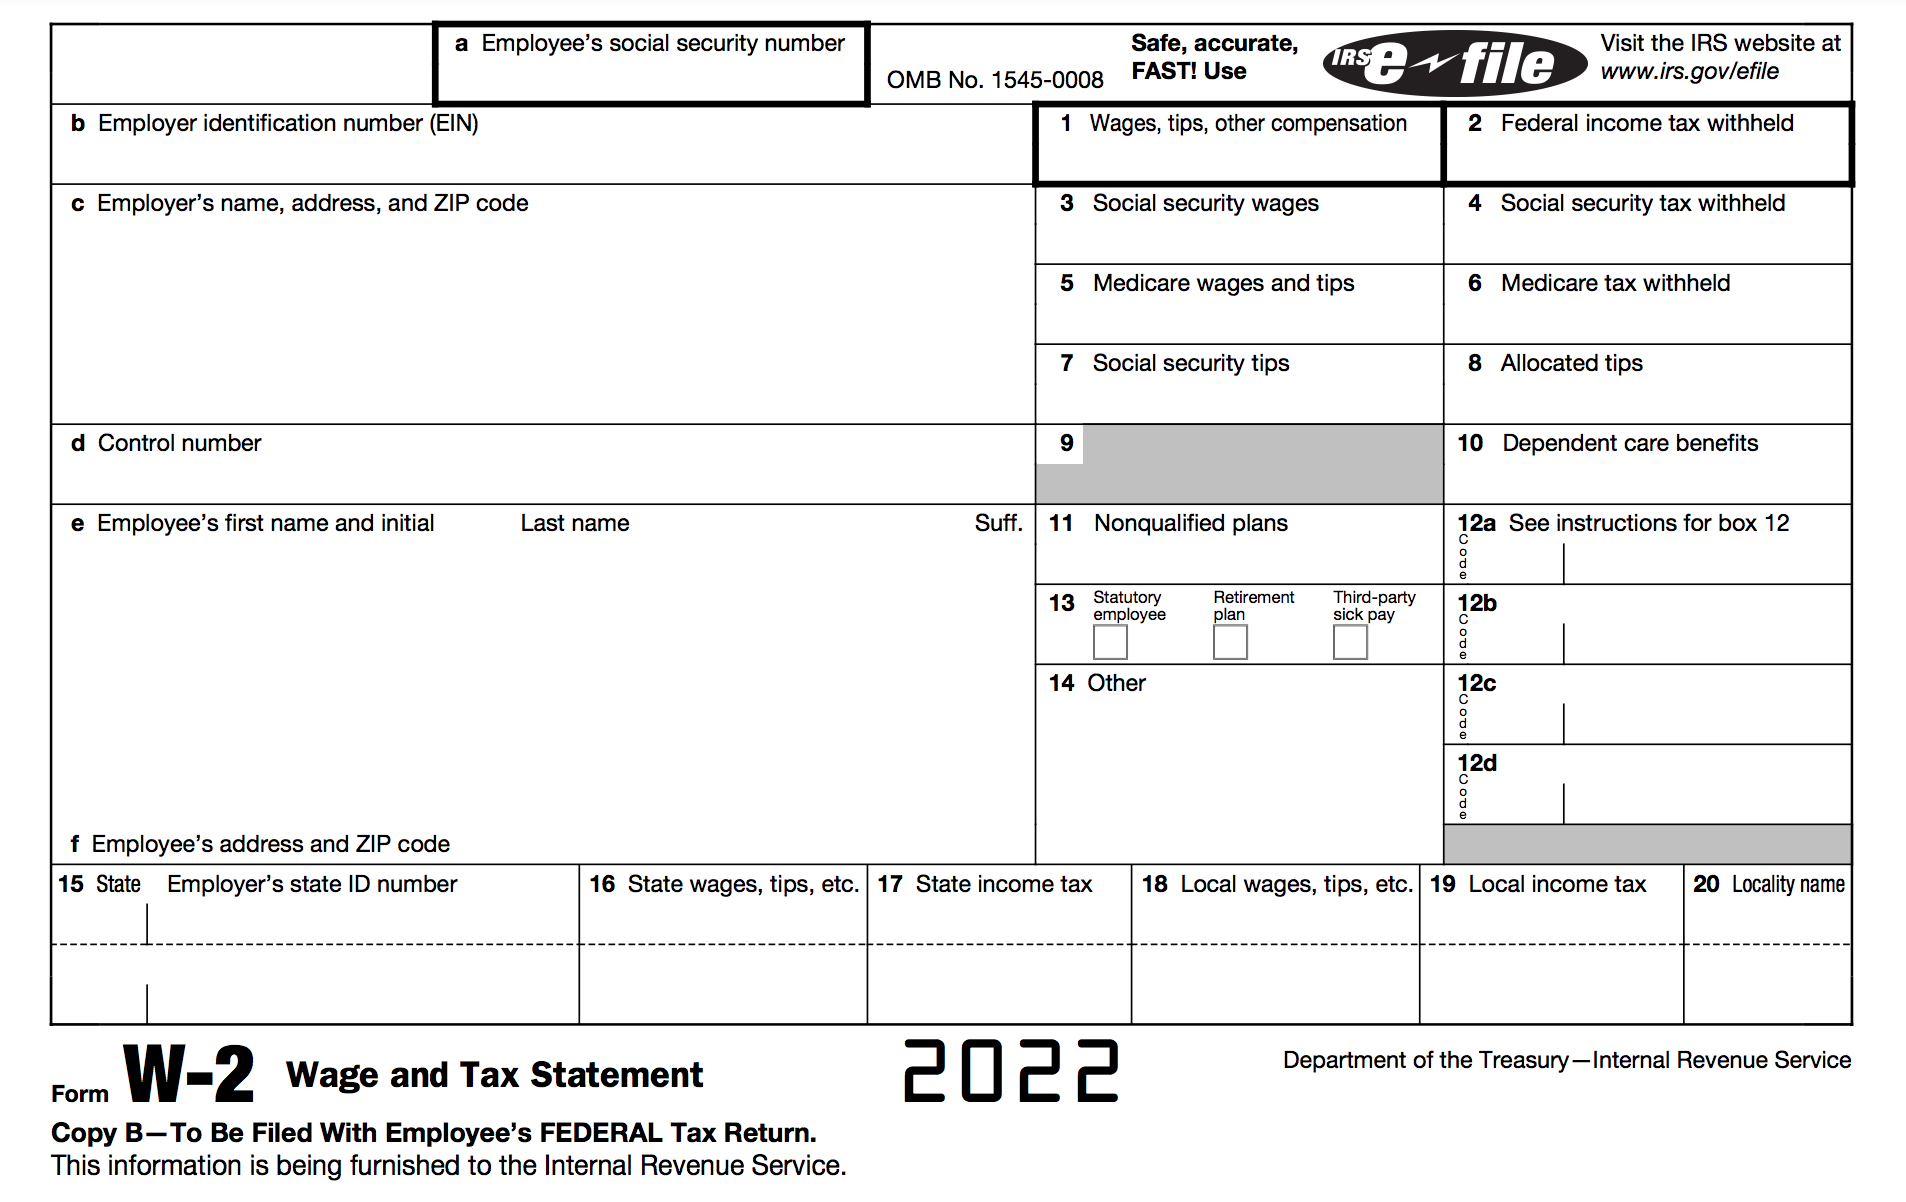 How To Fill Out A W-2 Tax Form | Smartasset with W2 Form Filled Out